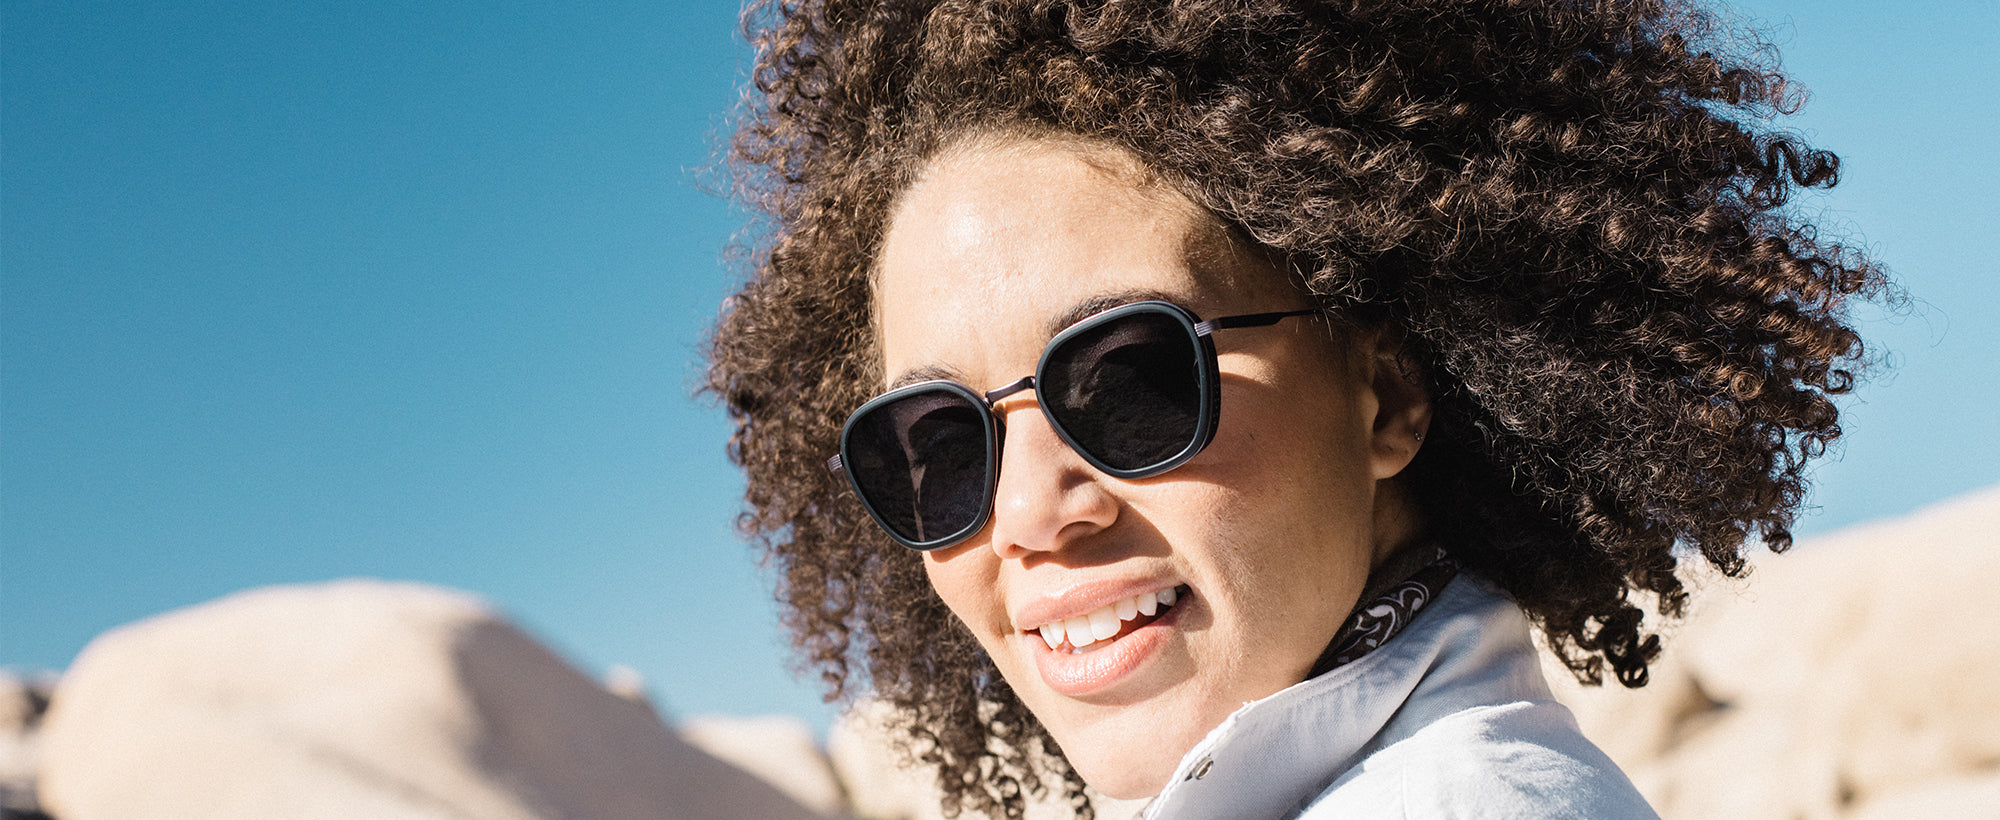 12 Best Sunglasses for Round Faces 2021